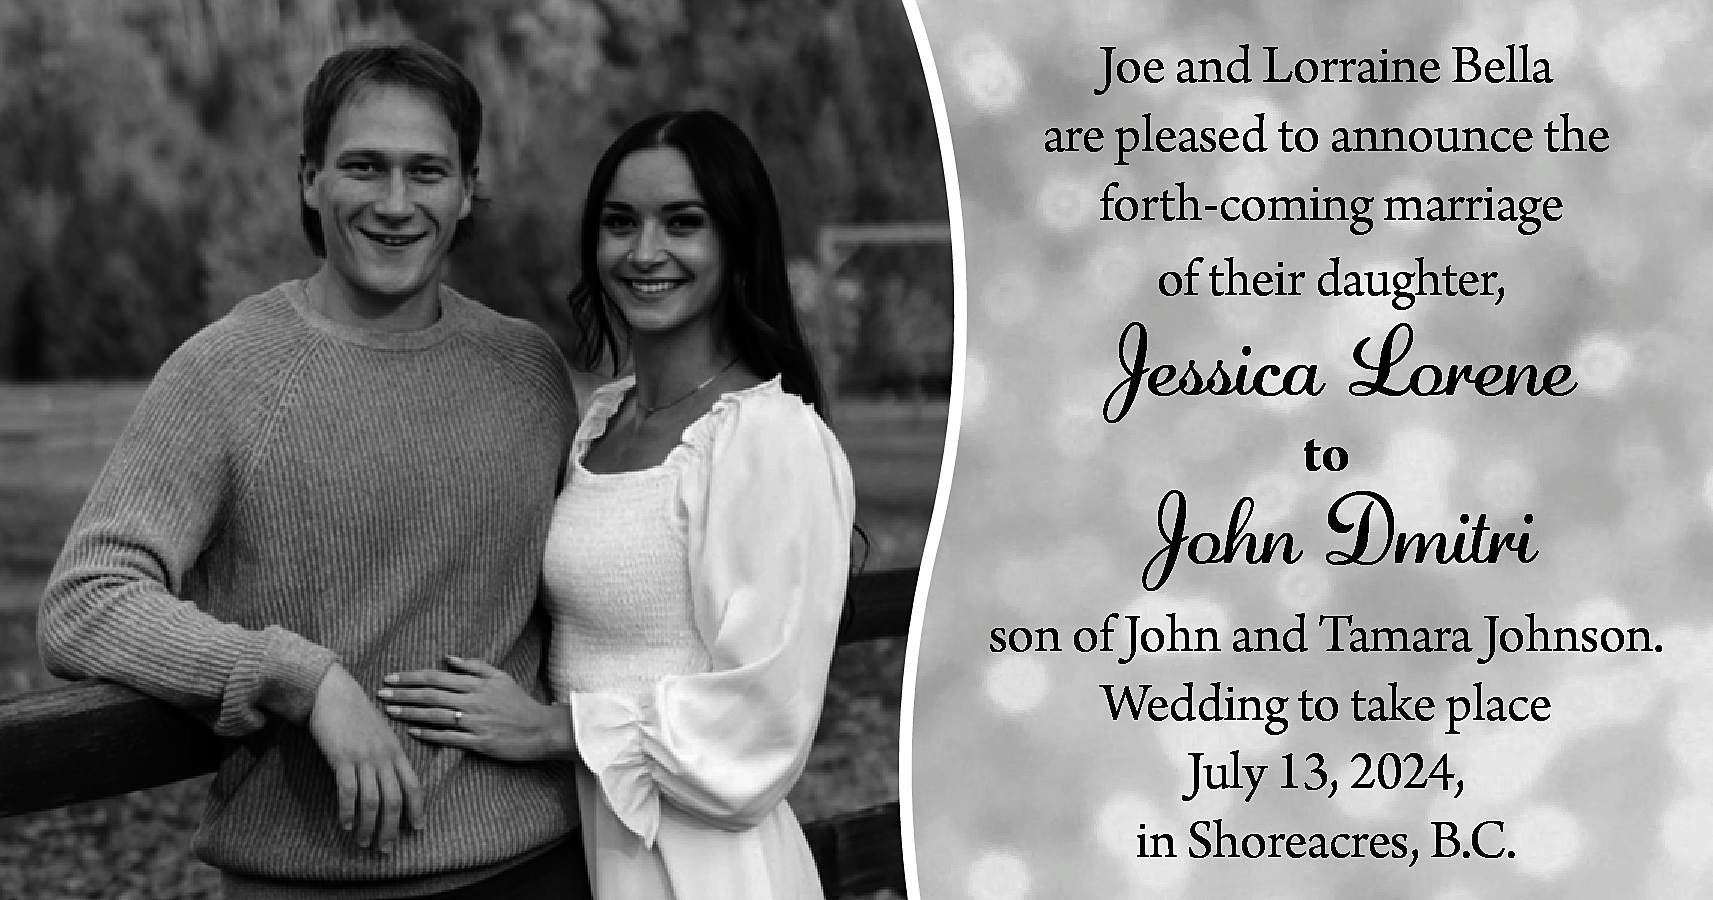 Joe and Lorraine Bella <br>are  Joe and Lorraine Bella  are pleased to announce the  forth-coming marriage  of their daughter,    Jessica Lorene  to    John Dmitri  son of John and Tamara Johnson.  Wedding to take place  July 13, 2024,  in Shoreacres, B.C.    